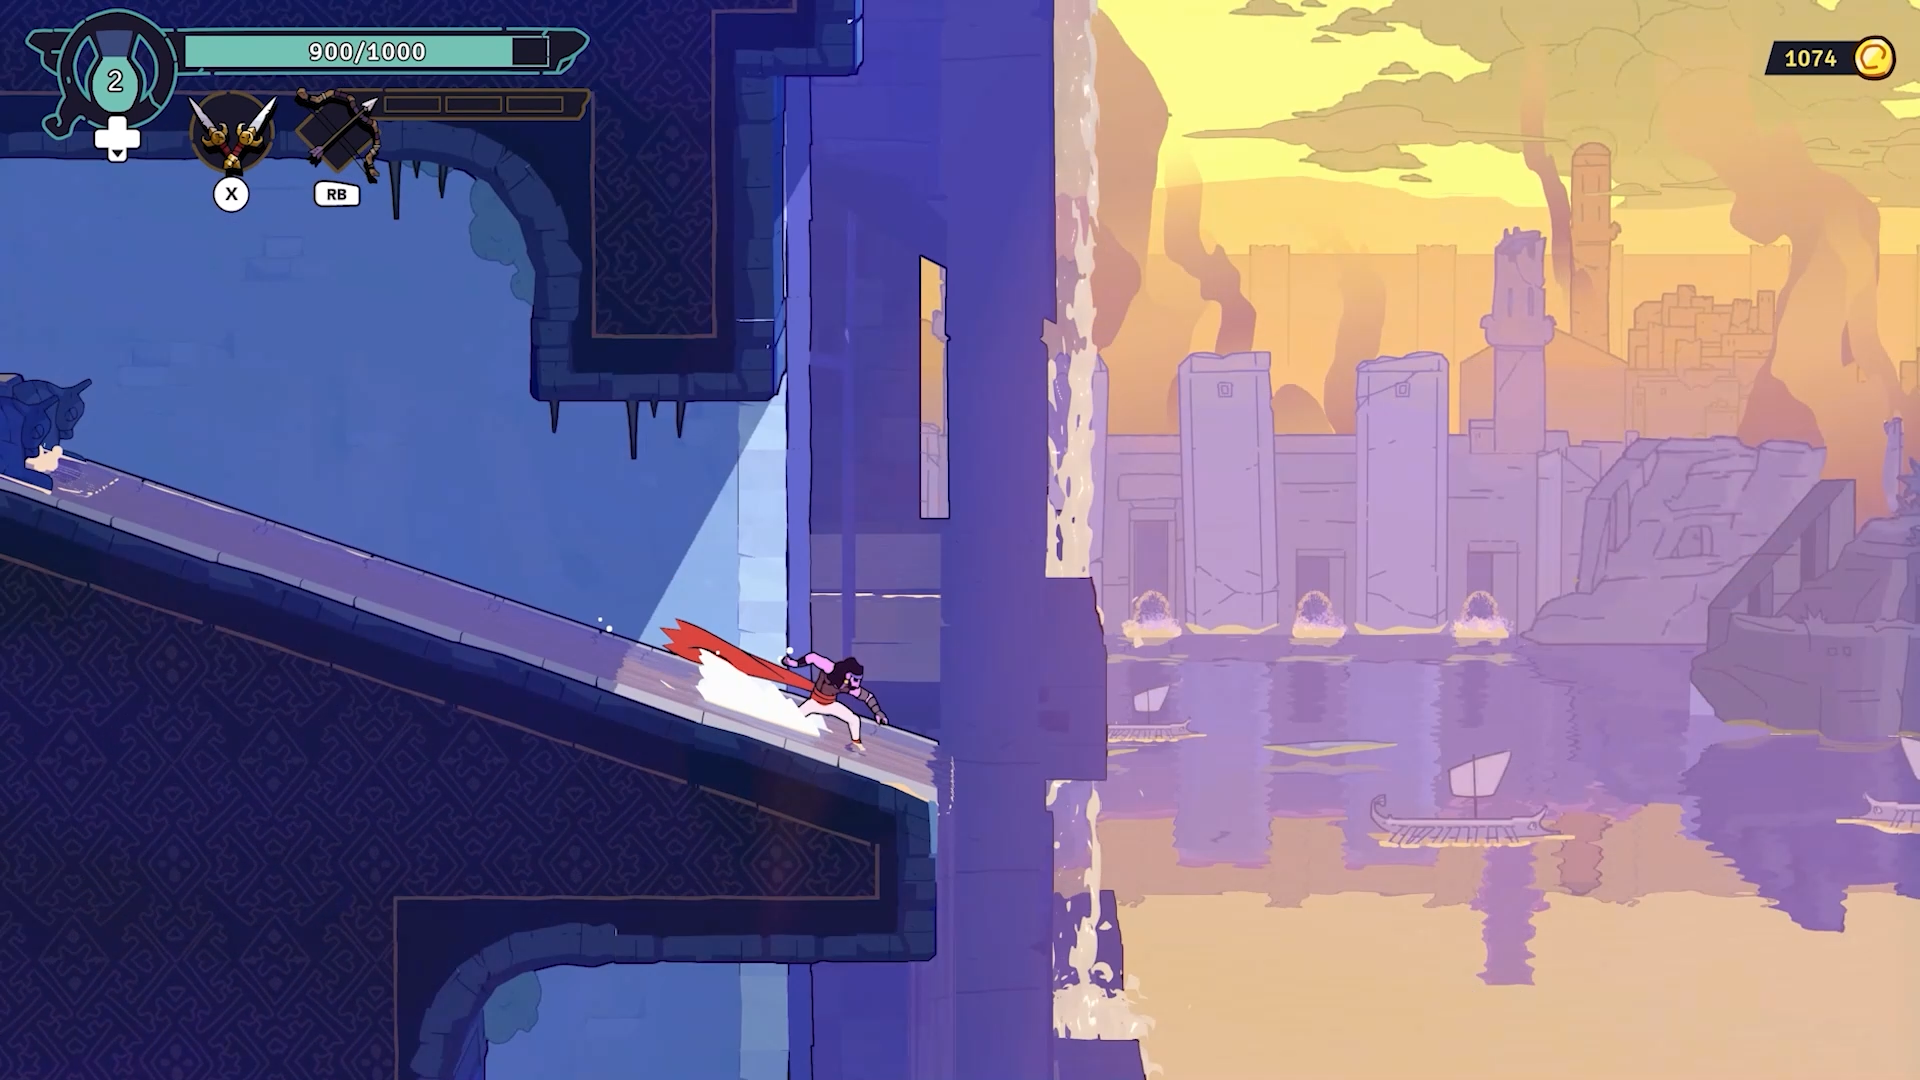 The Rogue Prince of Persia; the prince slides down a platform